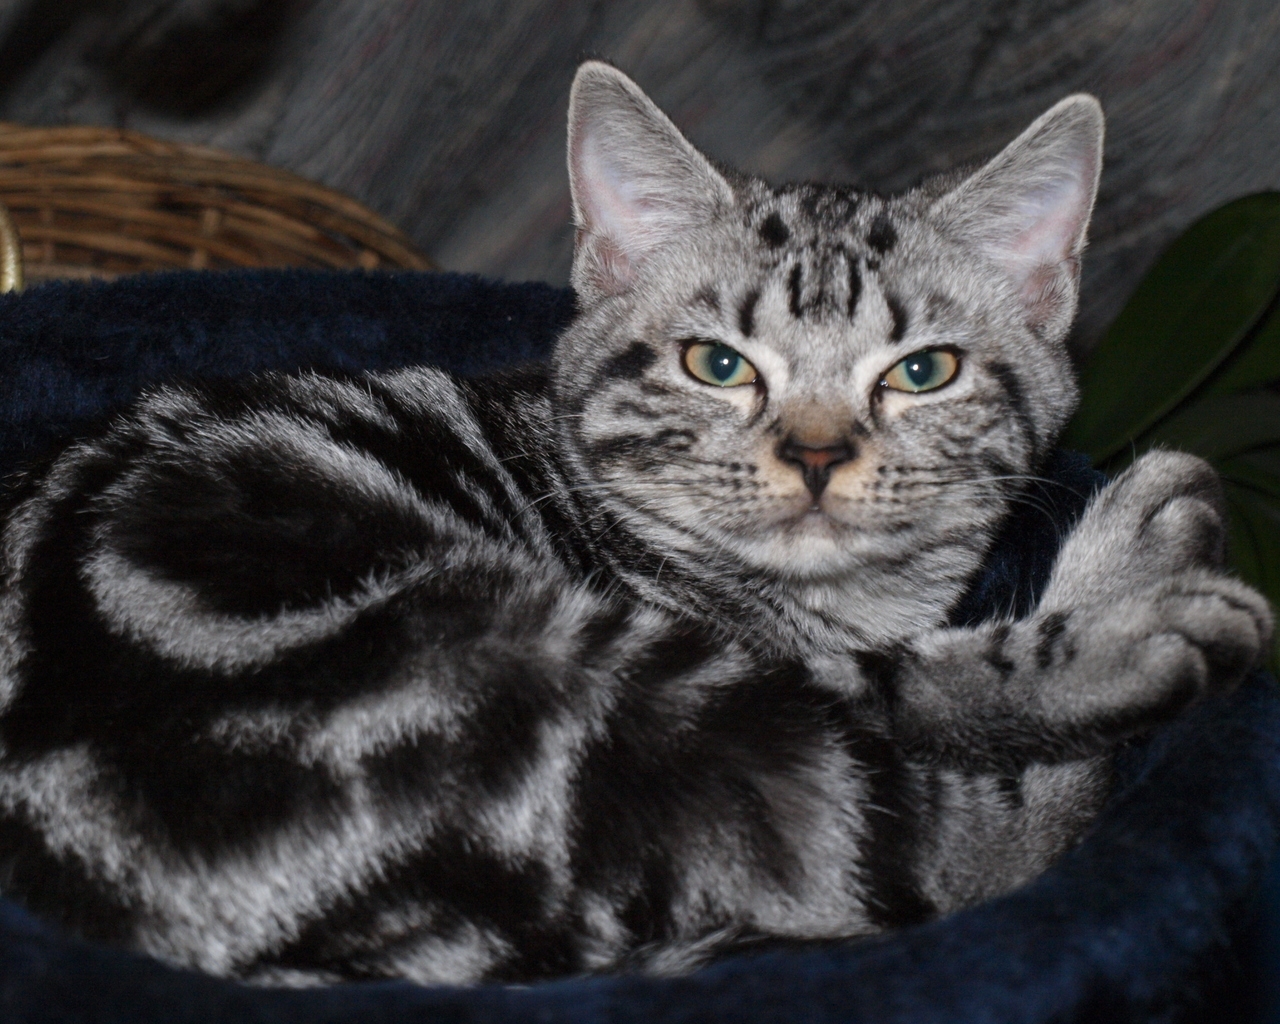 Blotched American Shorthair for 1280 x 1024 resolution